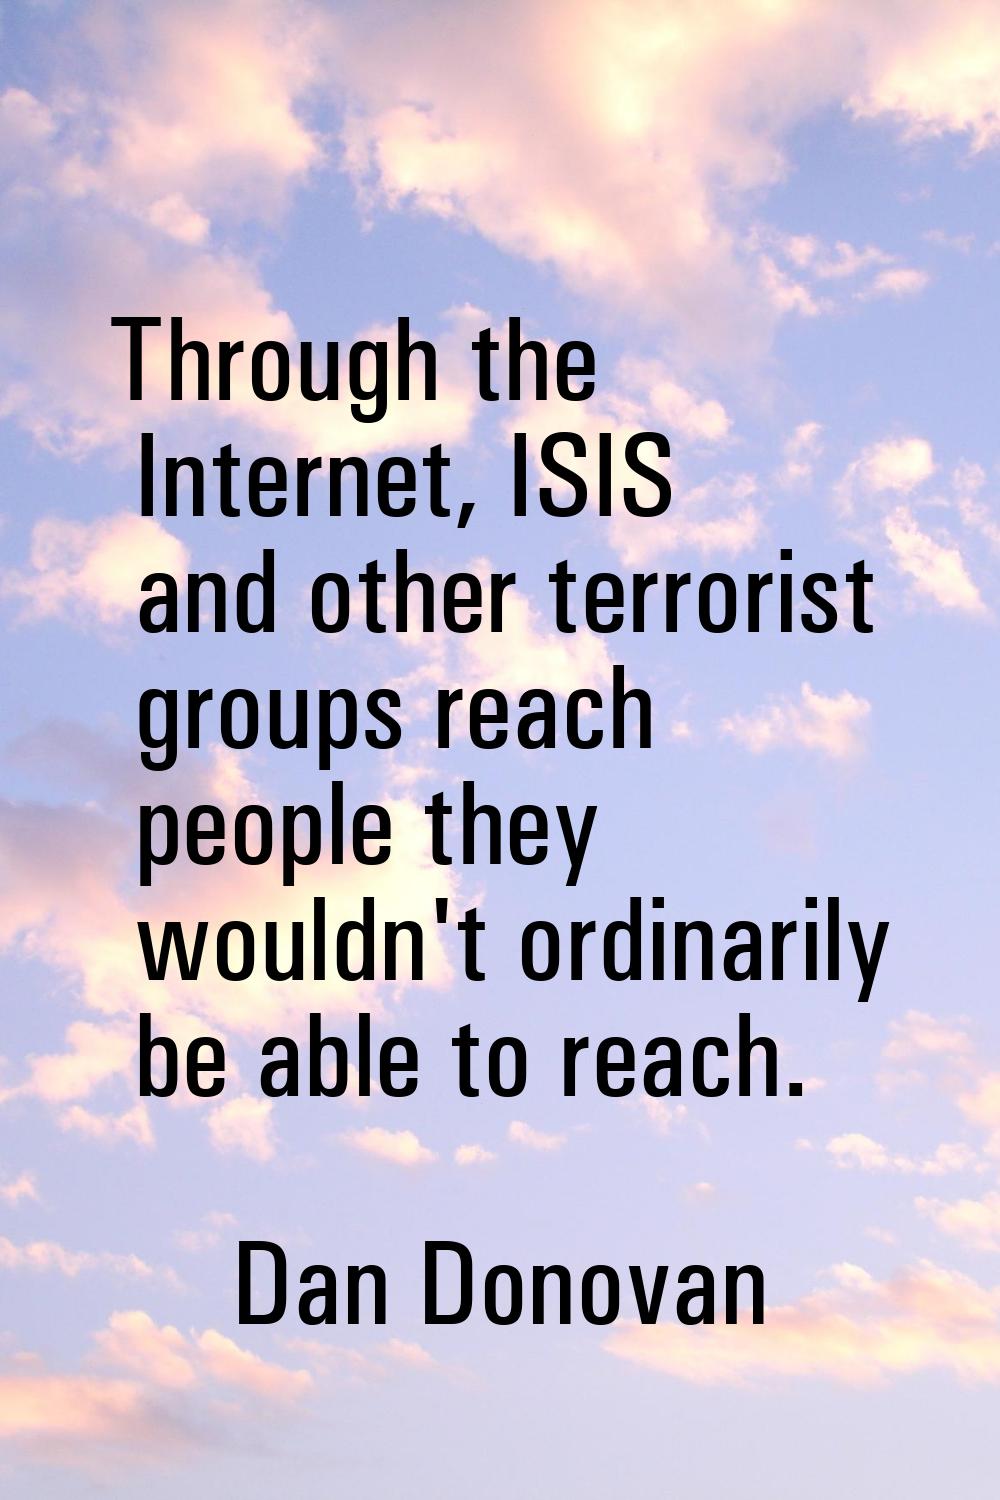 Through the Internet, ISIS and other terrorist groups reach people they wouldn't ordinarily be able